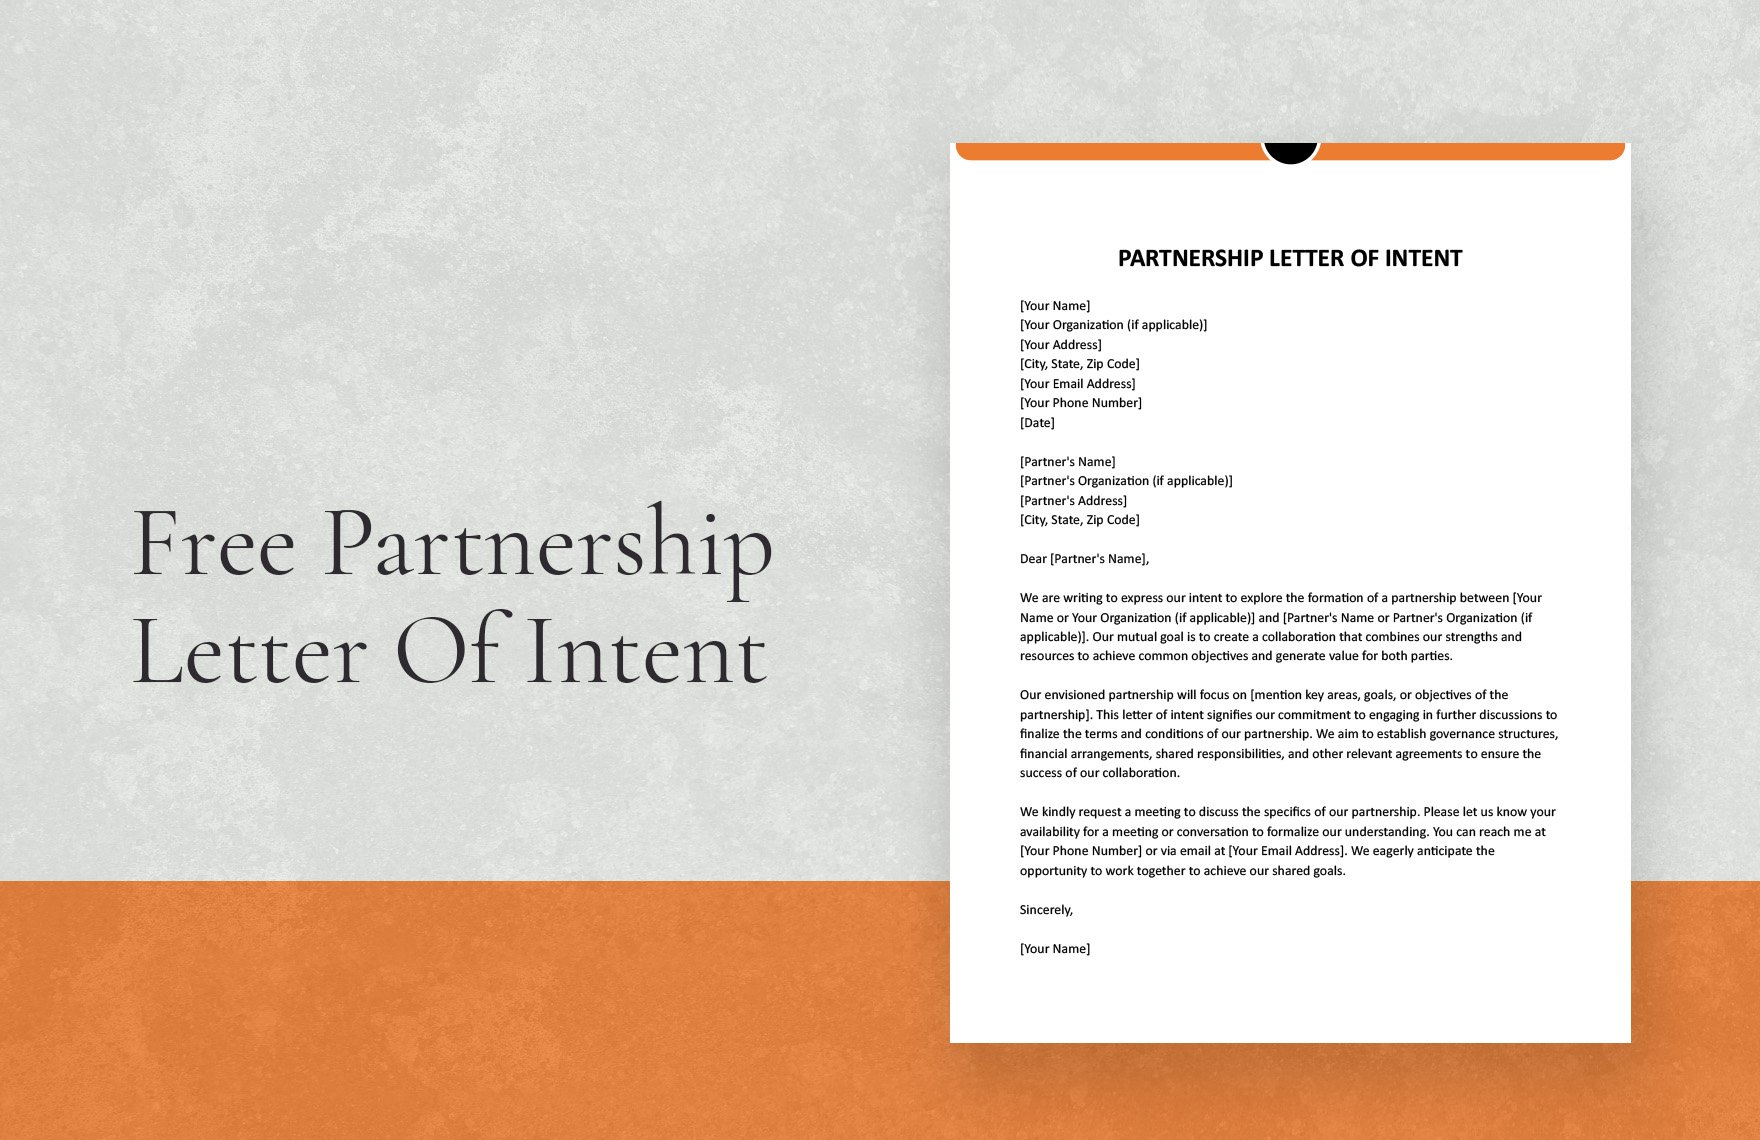 Partnership Letter Of Intent in Word, Google Docs